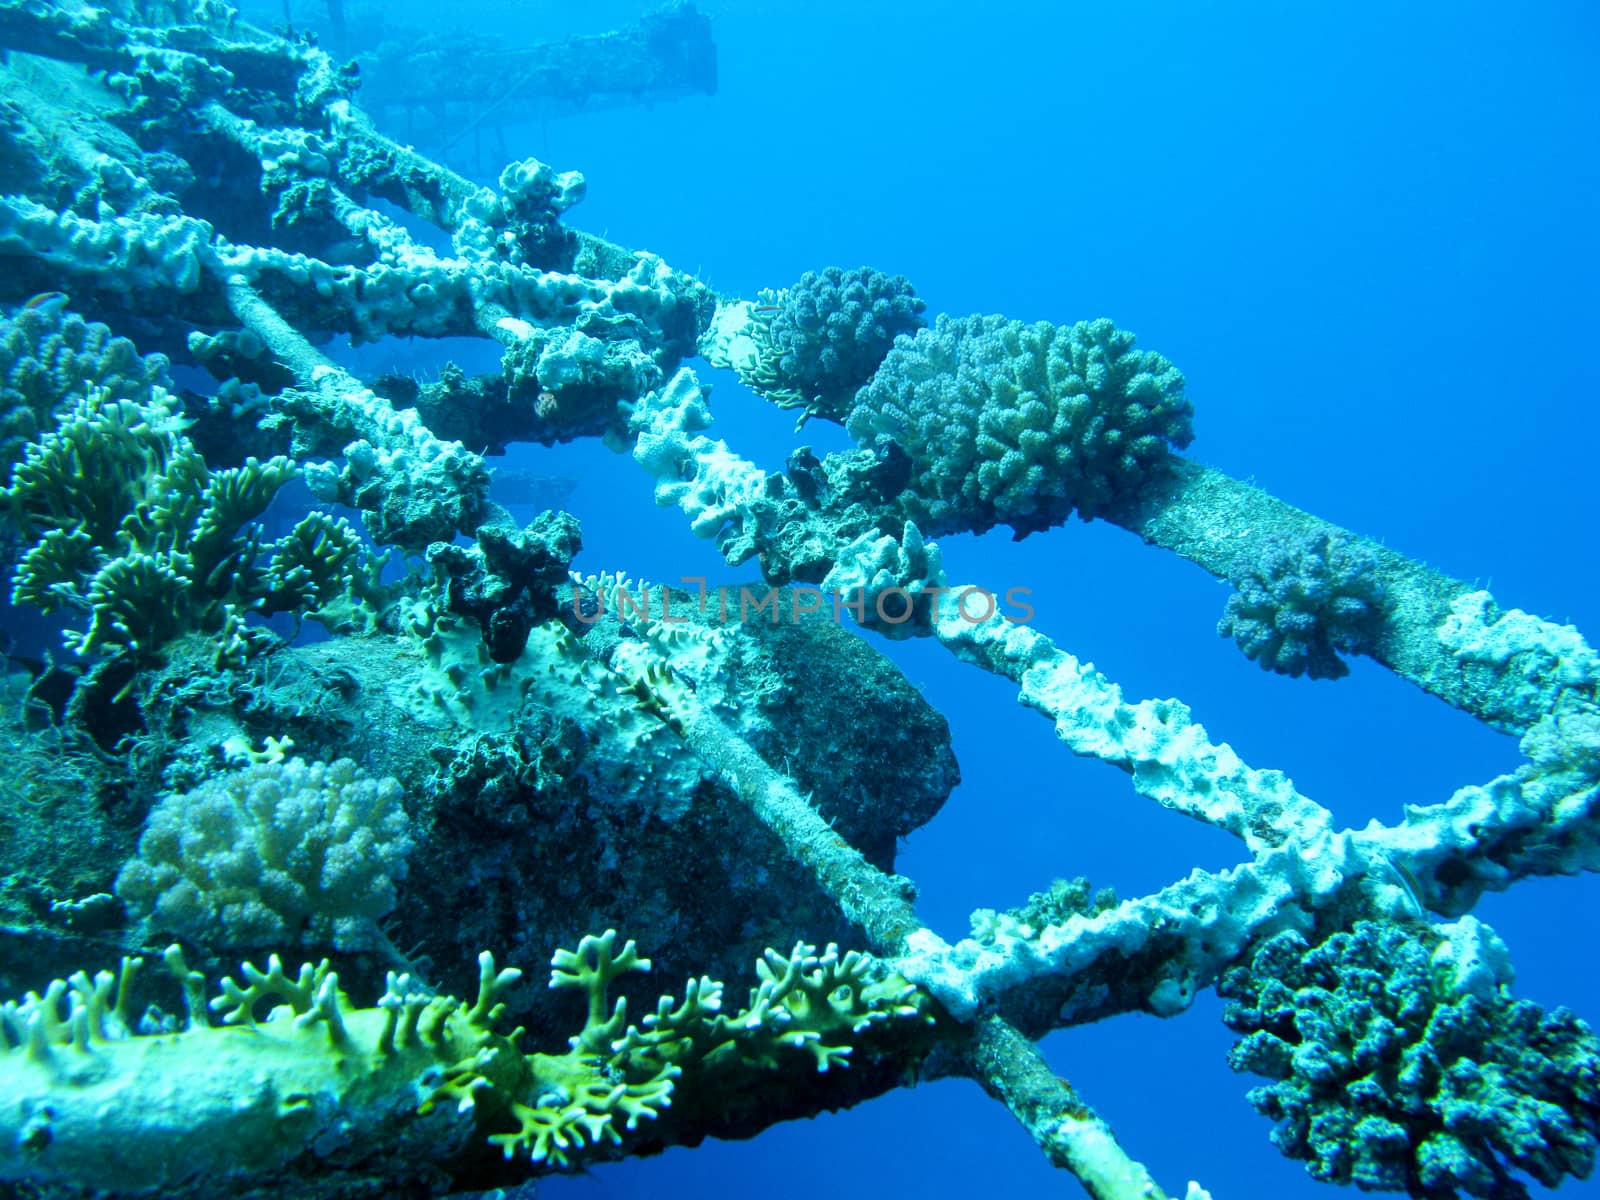 Fragment shipwreck with reef coral on the bottom, underwater by mychadre77